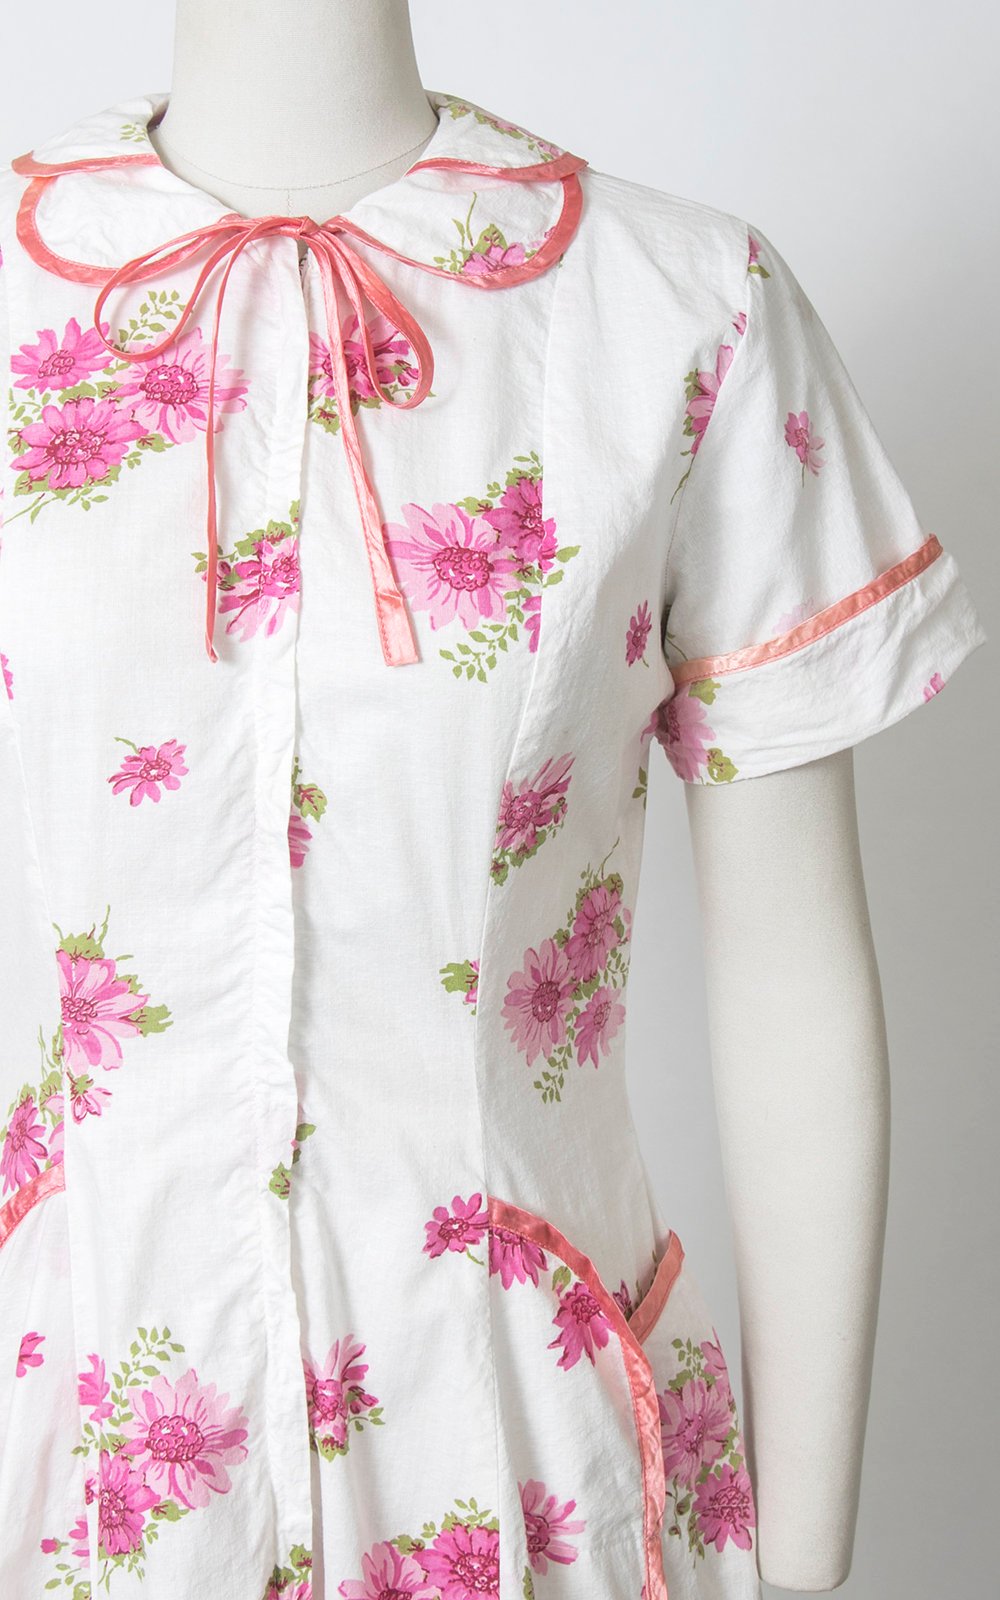 Vintage 1940s Dress | 40s Floral Print Cotton Day Dress White Pink House Dress with Pockets (medium)